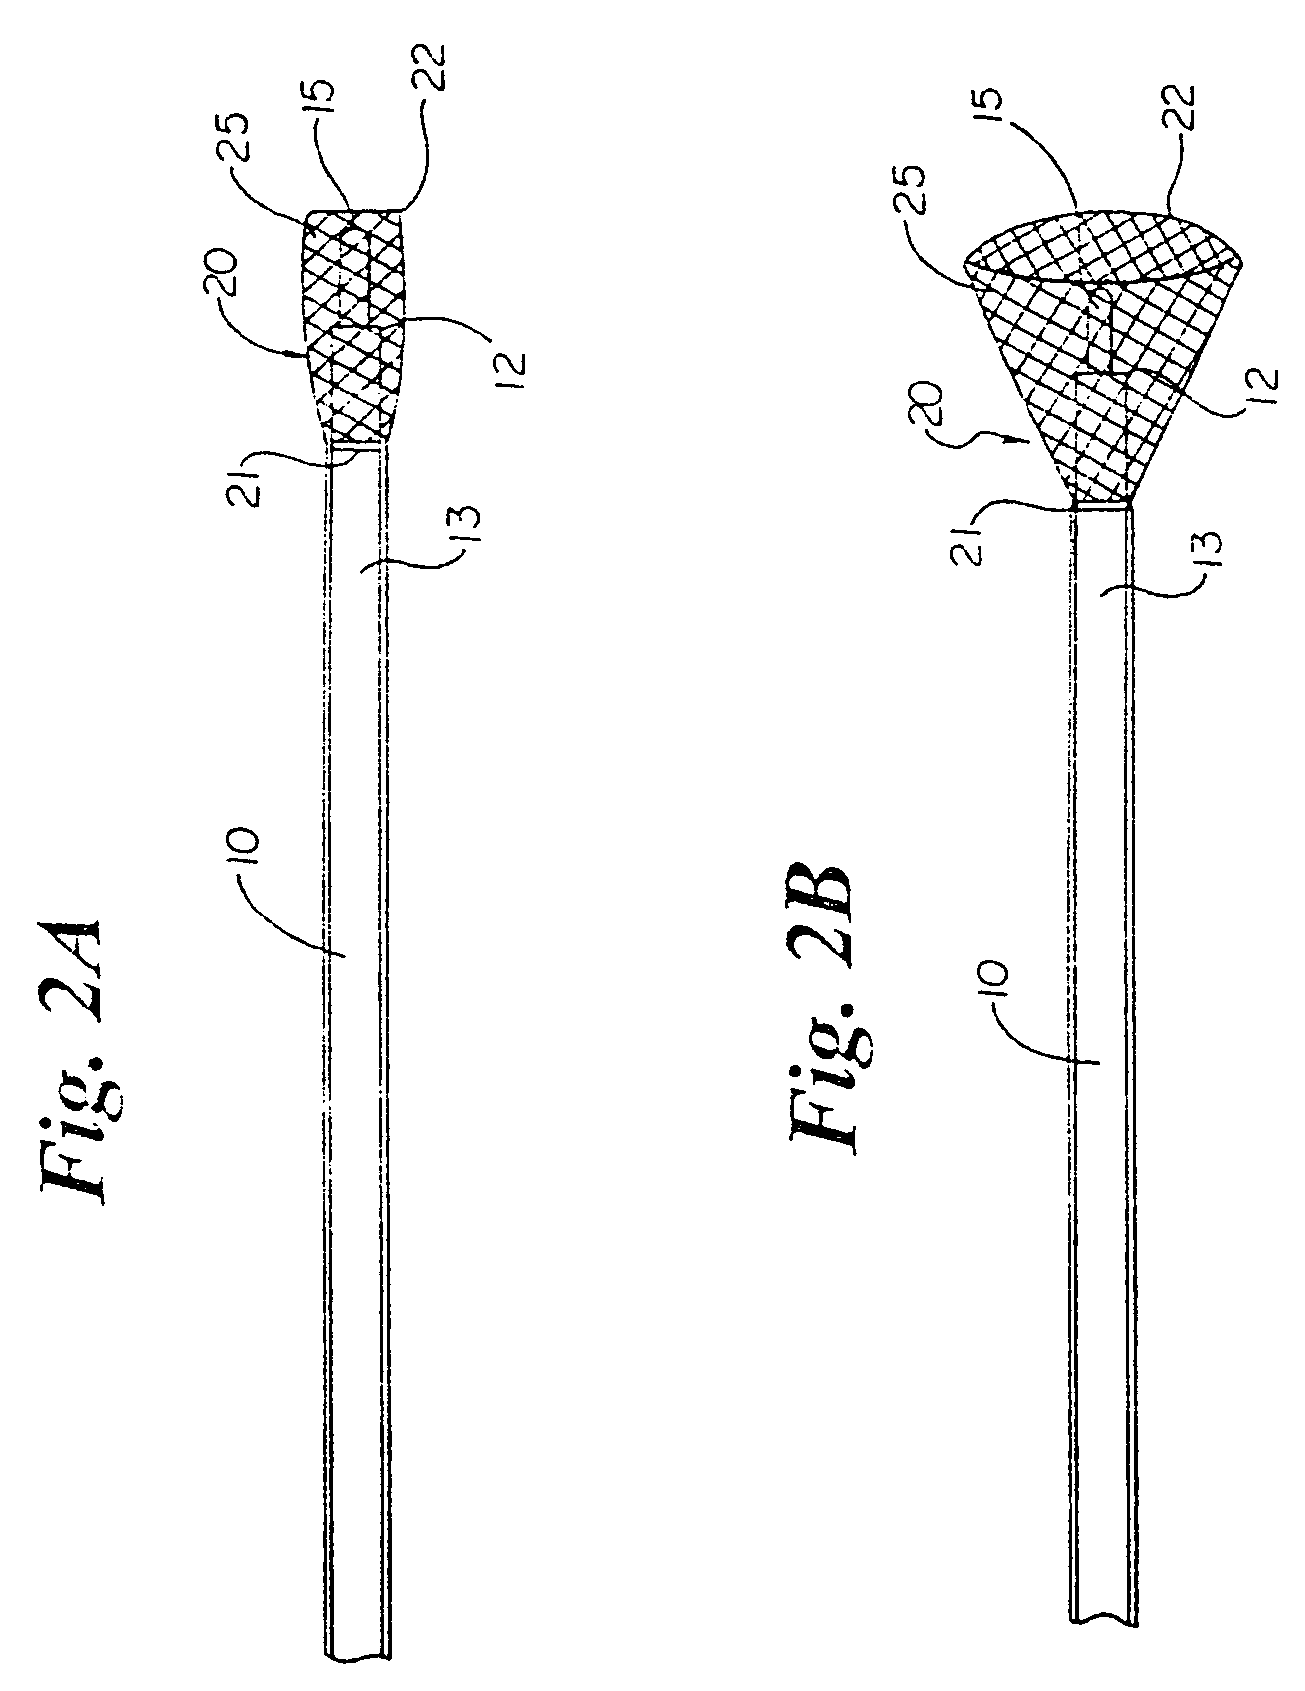 Percutaneous catheter and guidewire for filtering during ablation of myocardial or vascular tissue